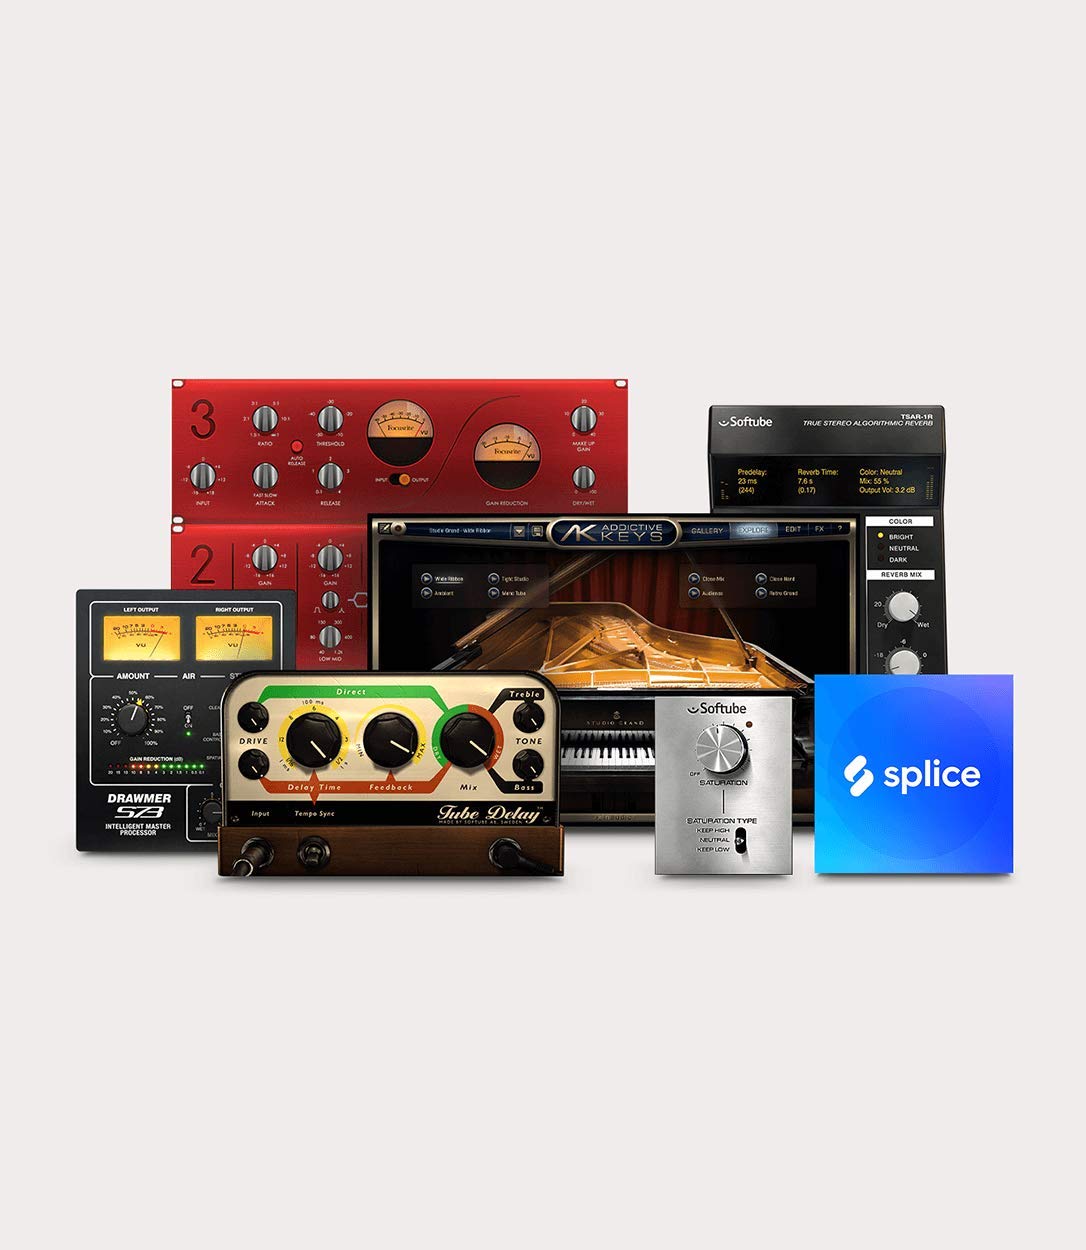 Focusrite Scarlett Solo 2x2 USB Audio Interface Full Studio Bundle with Creative Music Production Software Kit and Eris 4.5 Pair Studio Monitors and 1/4” Instrument Cables